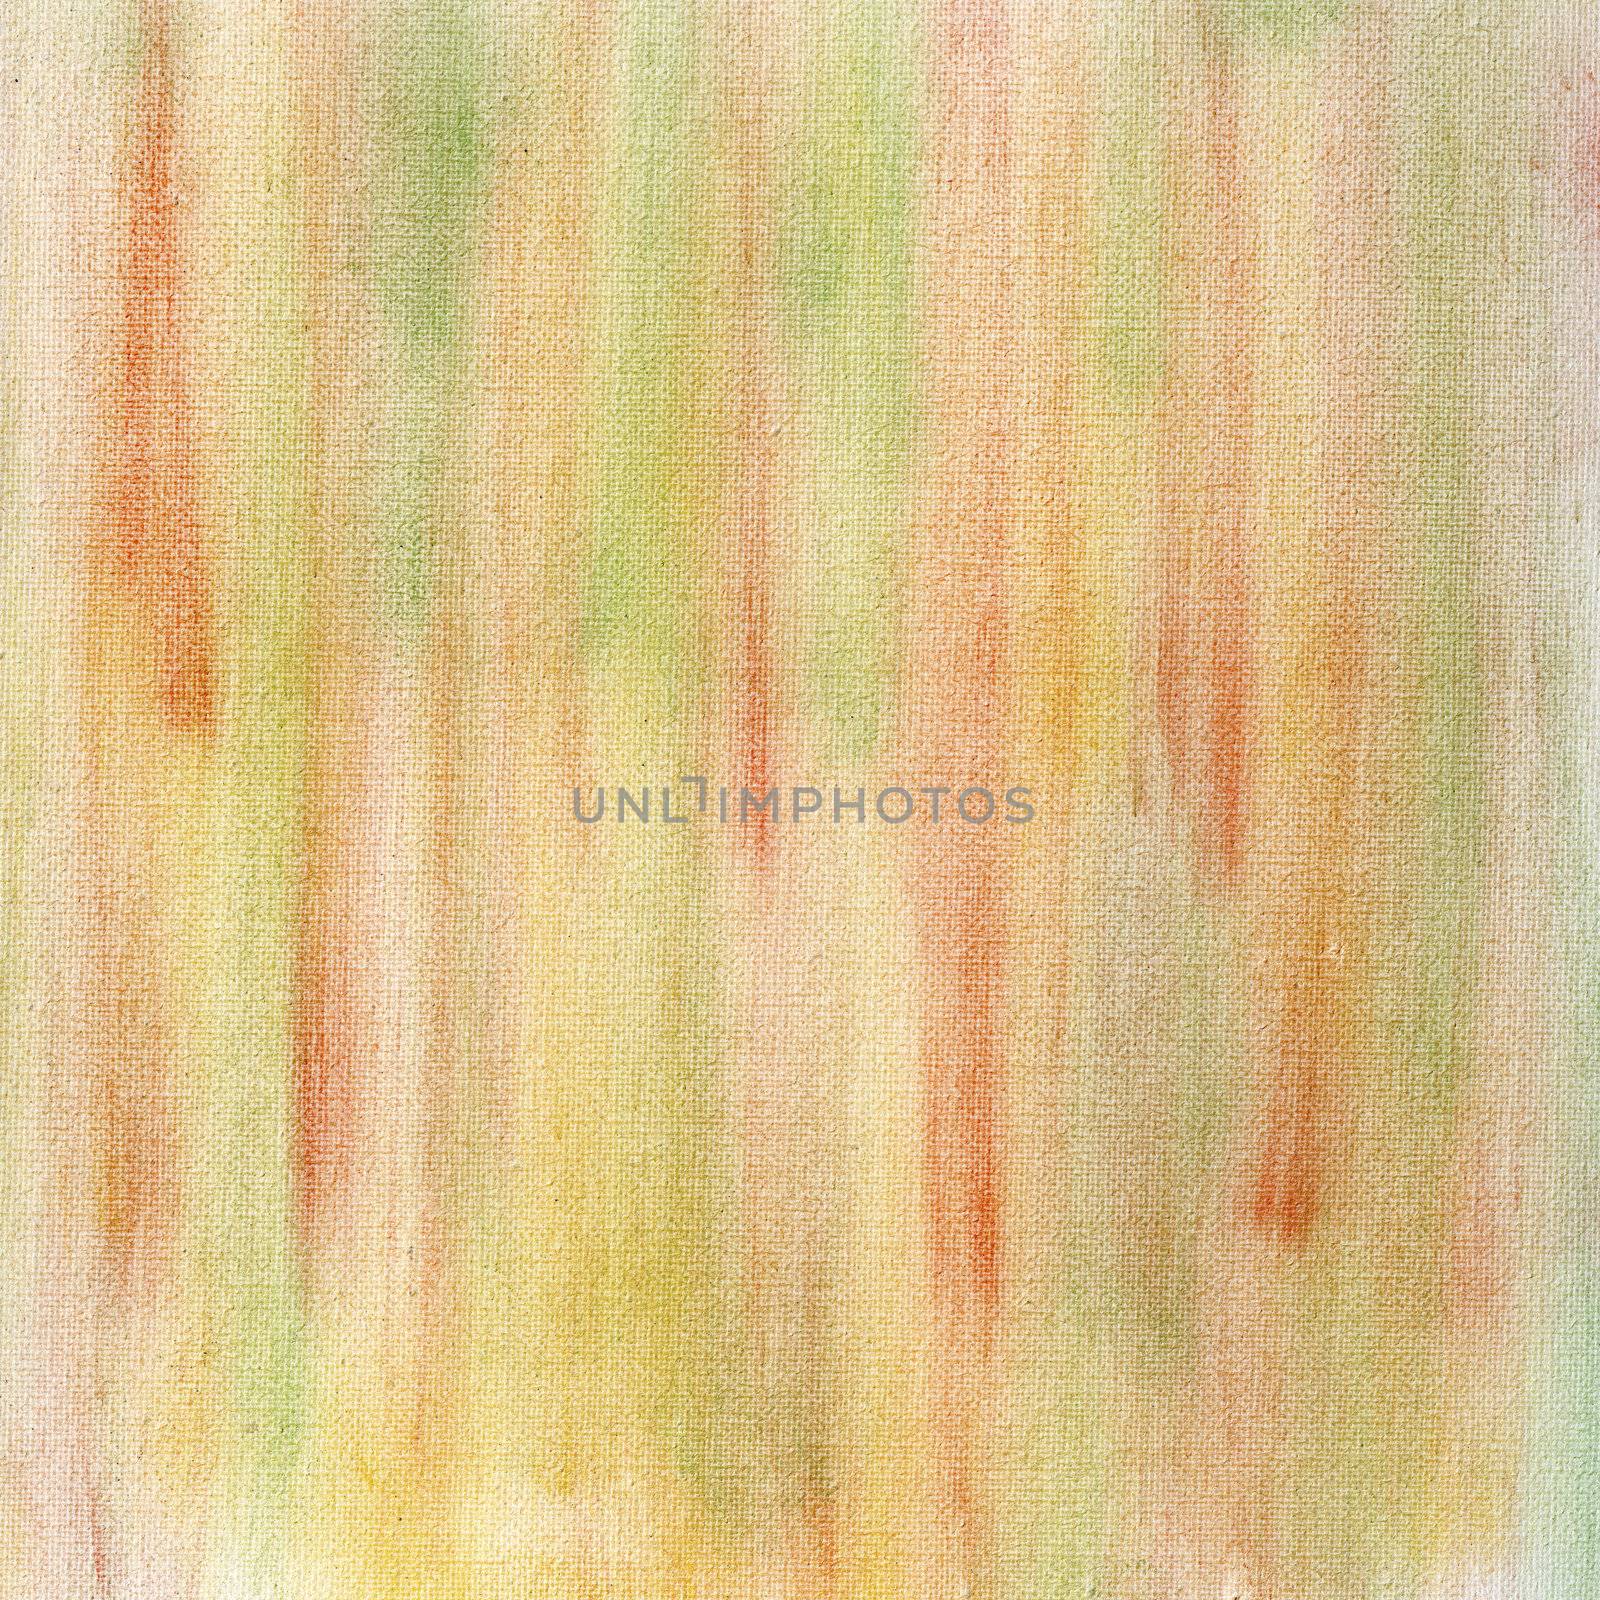 red, yellow and green crayon pastel smudges on white artist canvas, self made by photographer